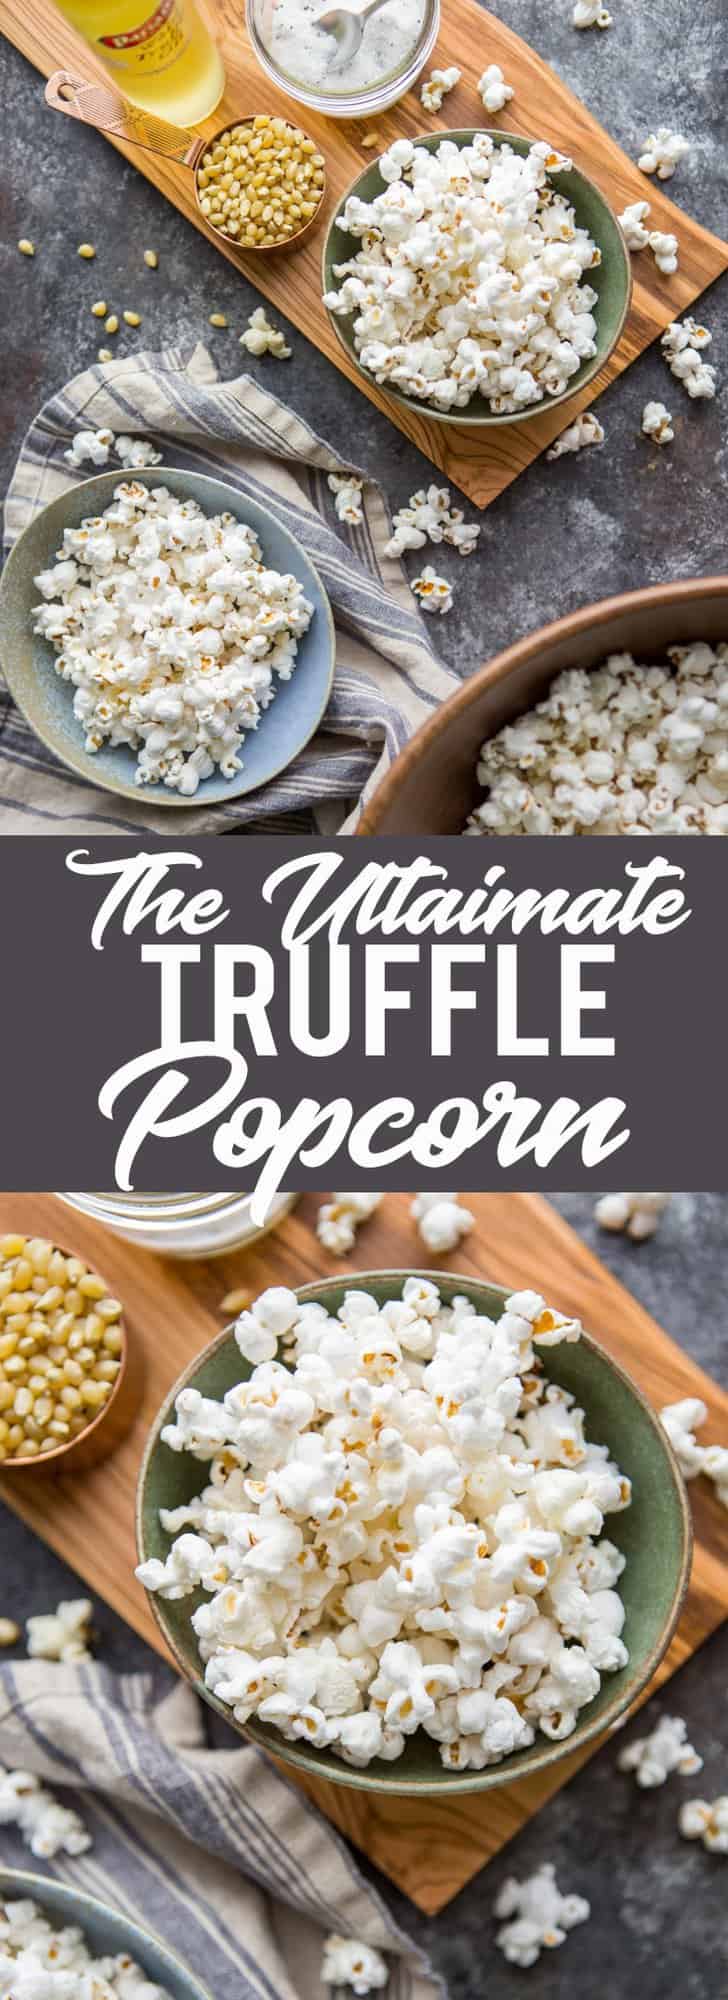 This really is the Ultimate Truffle Popcorn! Make the most delicious truffle popcorn at home in just a few minutes. | popcorn recipe | truffle popcorn recipe | snack recipe | movie night